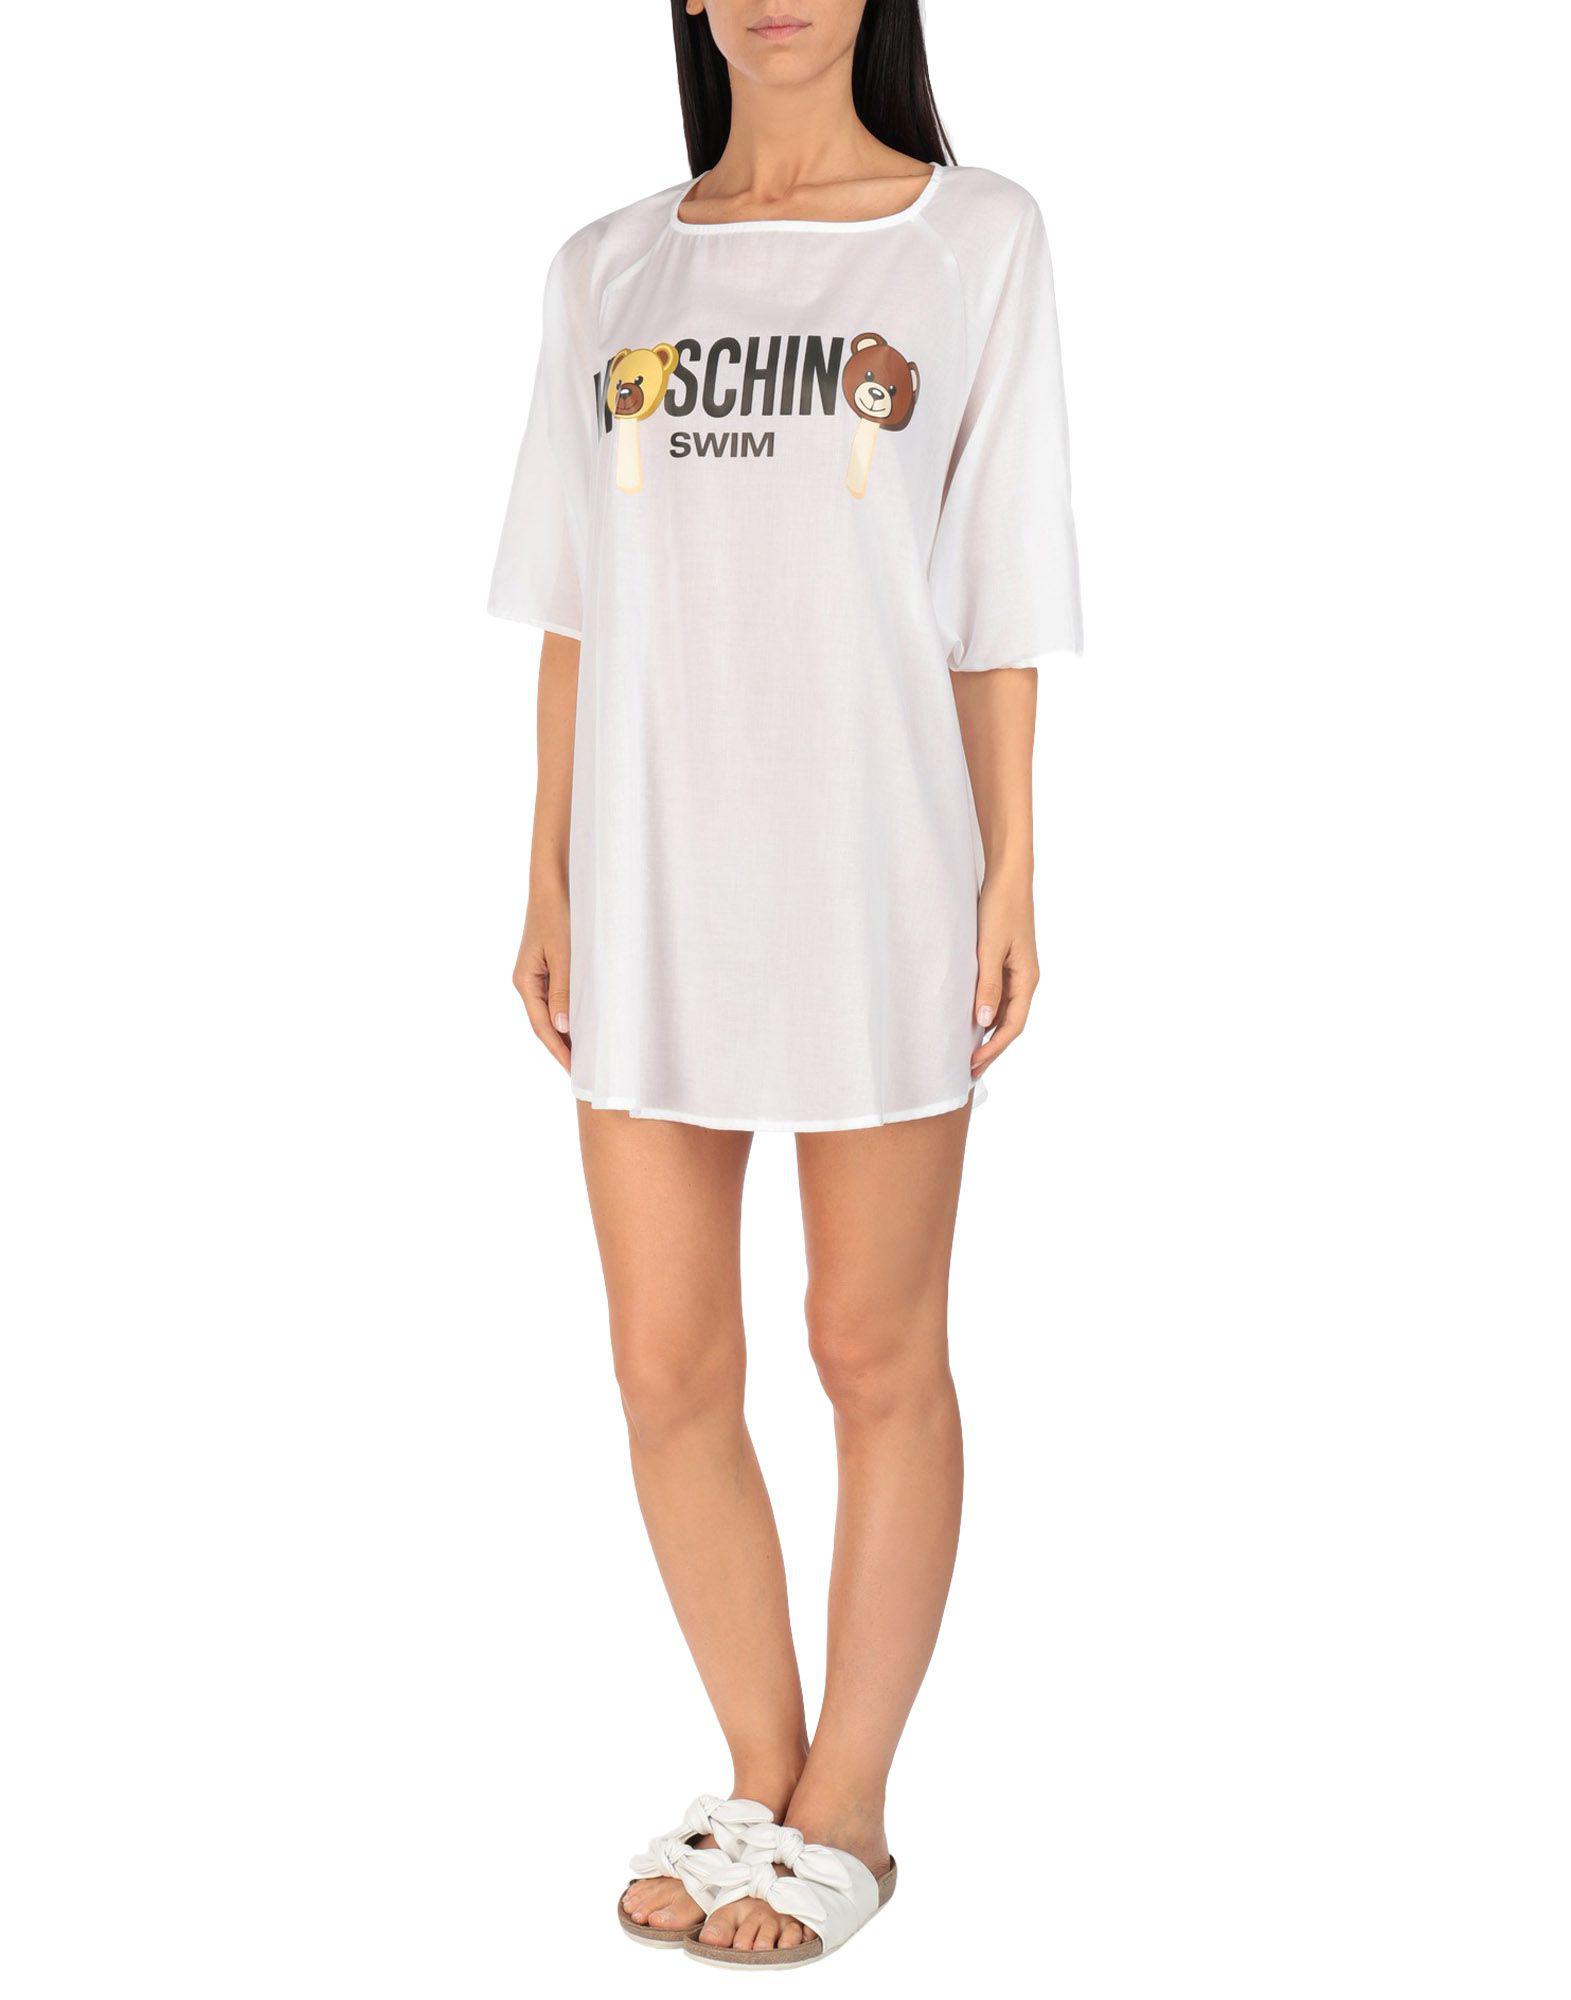 Moschino Cotton Cover-up in White - Lyst